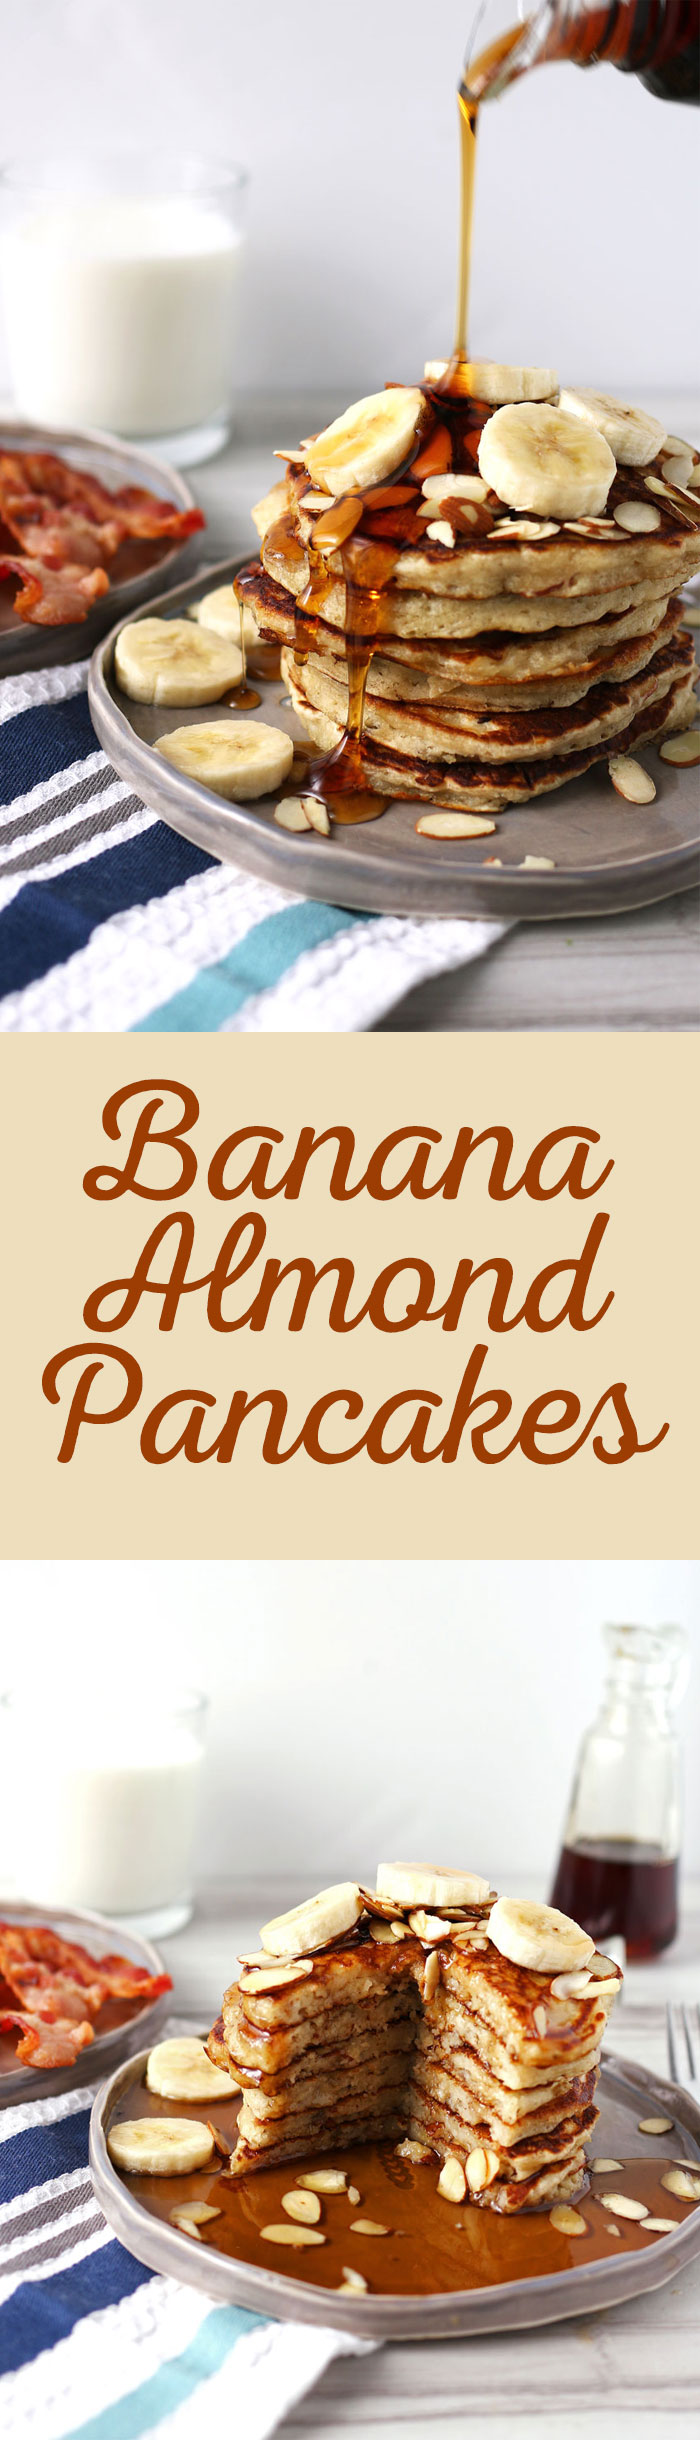 Make these delicious Banana Almond Pancakes for your next brunch or Saturday morning breakfast! Get the recipe at craftaholicsanonymous.net